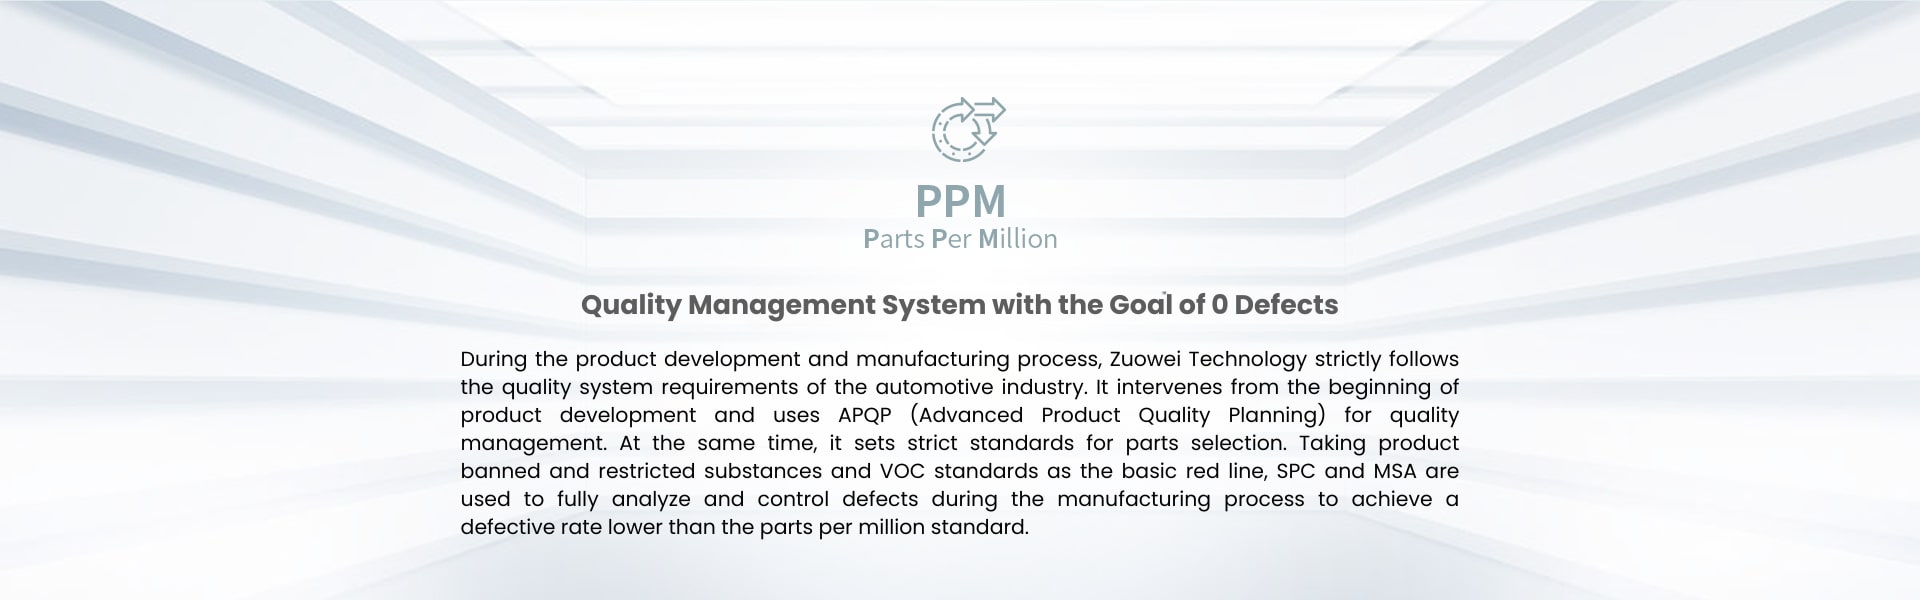 Quality management system with the goal of 0 defects